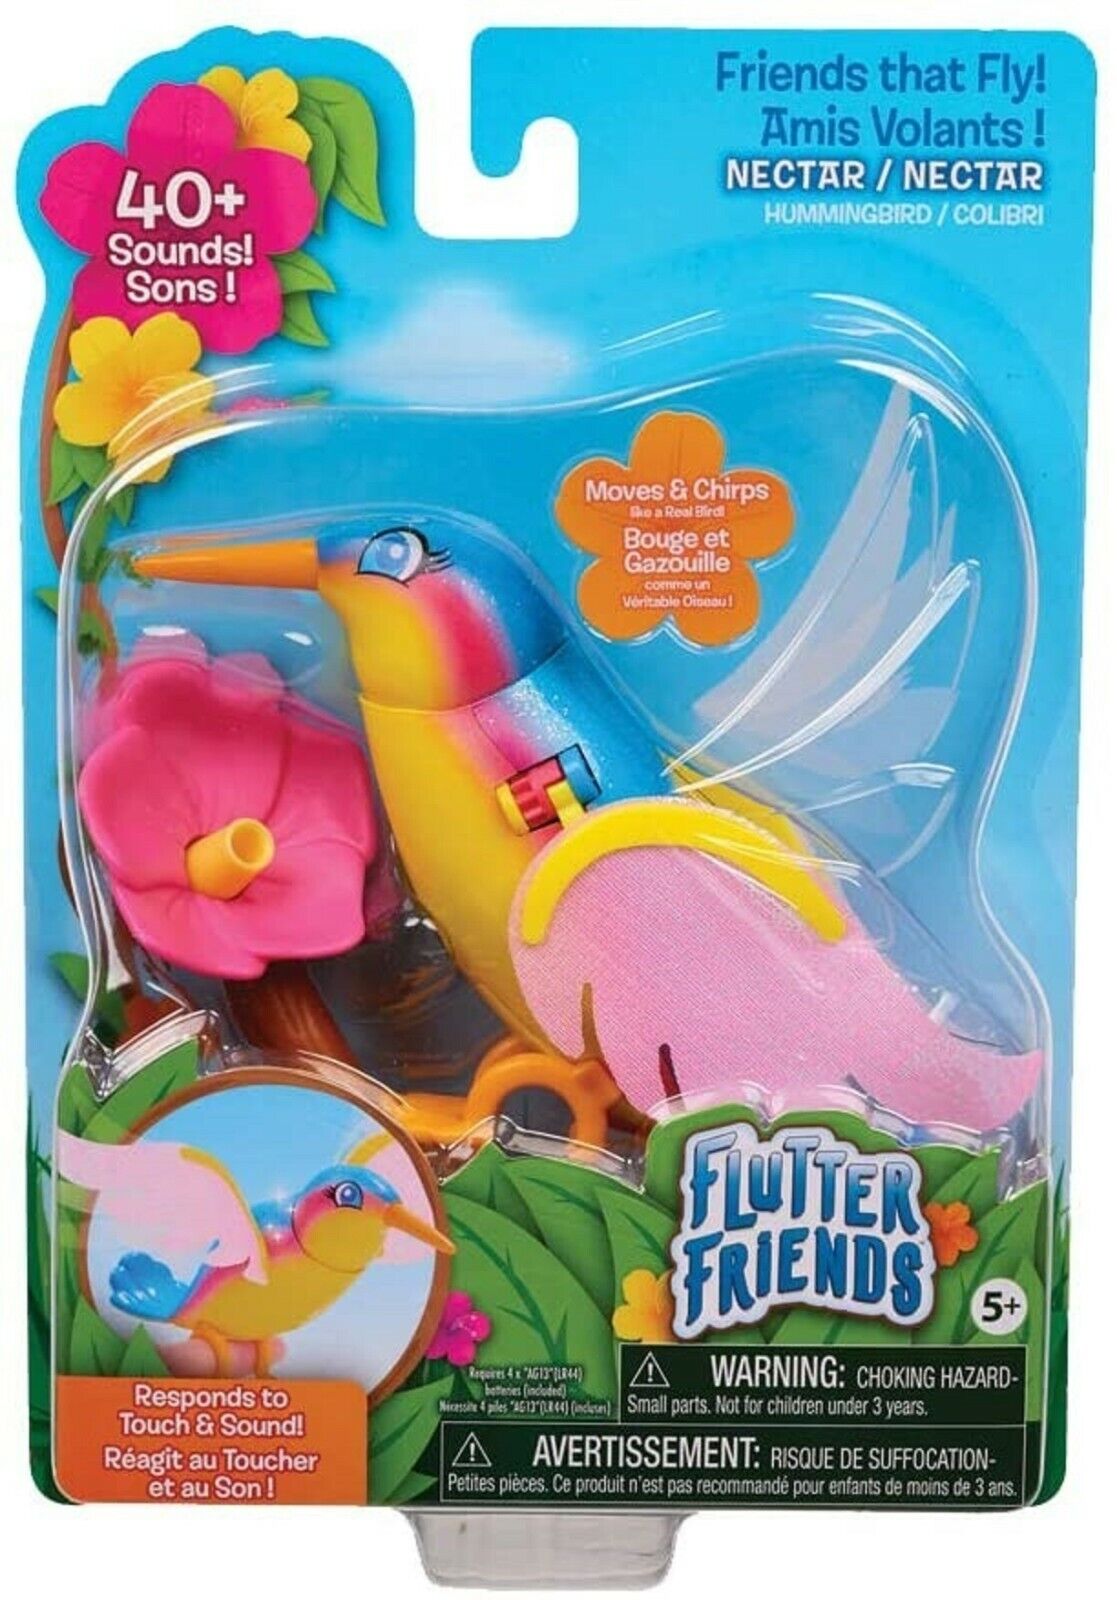 Flutter Friends Electronic Pet Hummingbird Ages 5+ Toy Bird Play Gift Live Pets